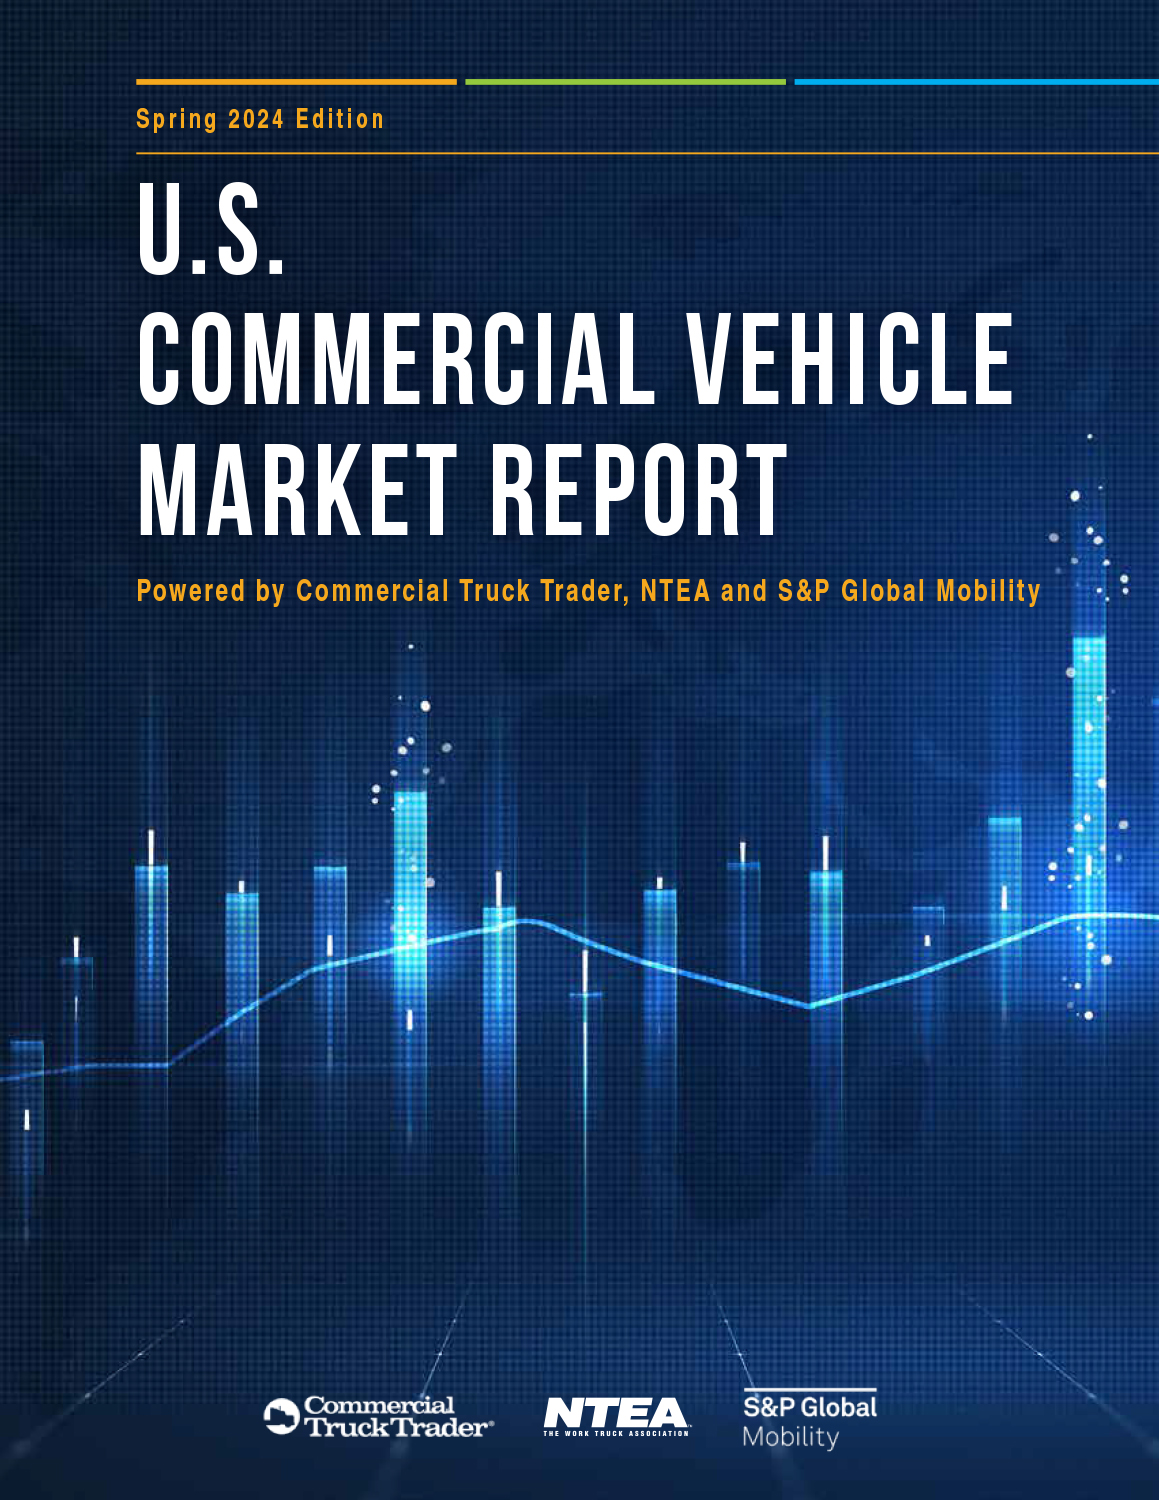 U.S. Commercial Vehicle Market Report (Spring 2024 Edition)